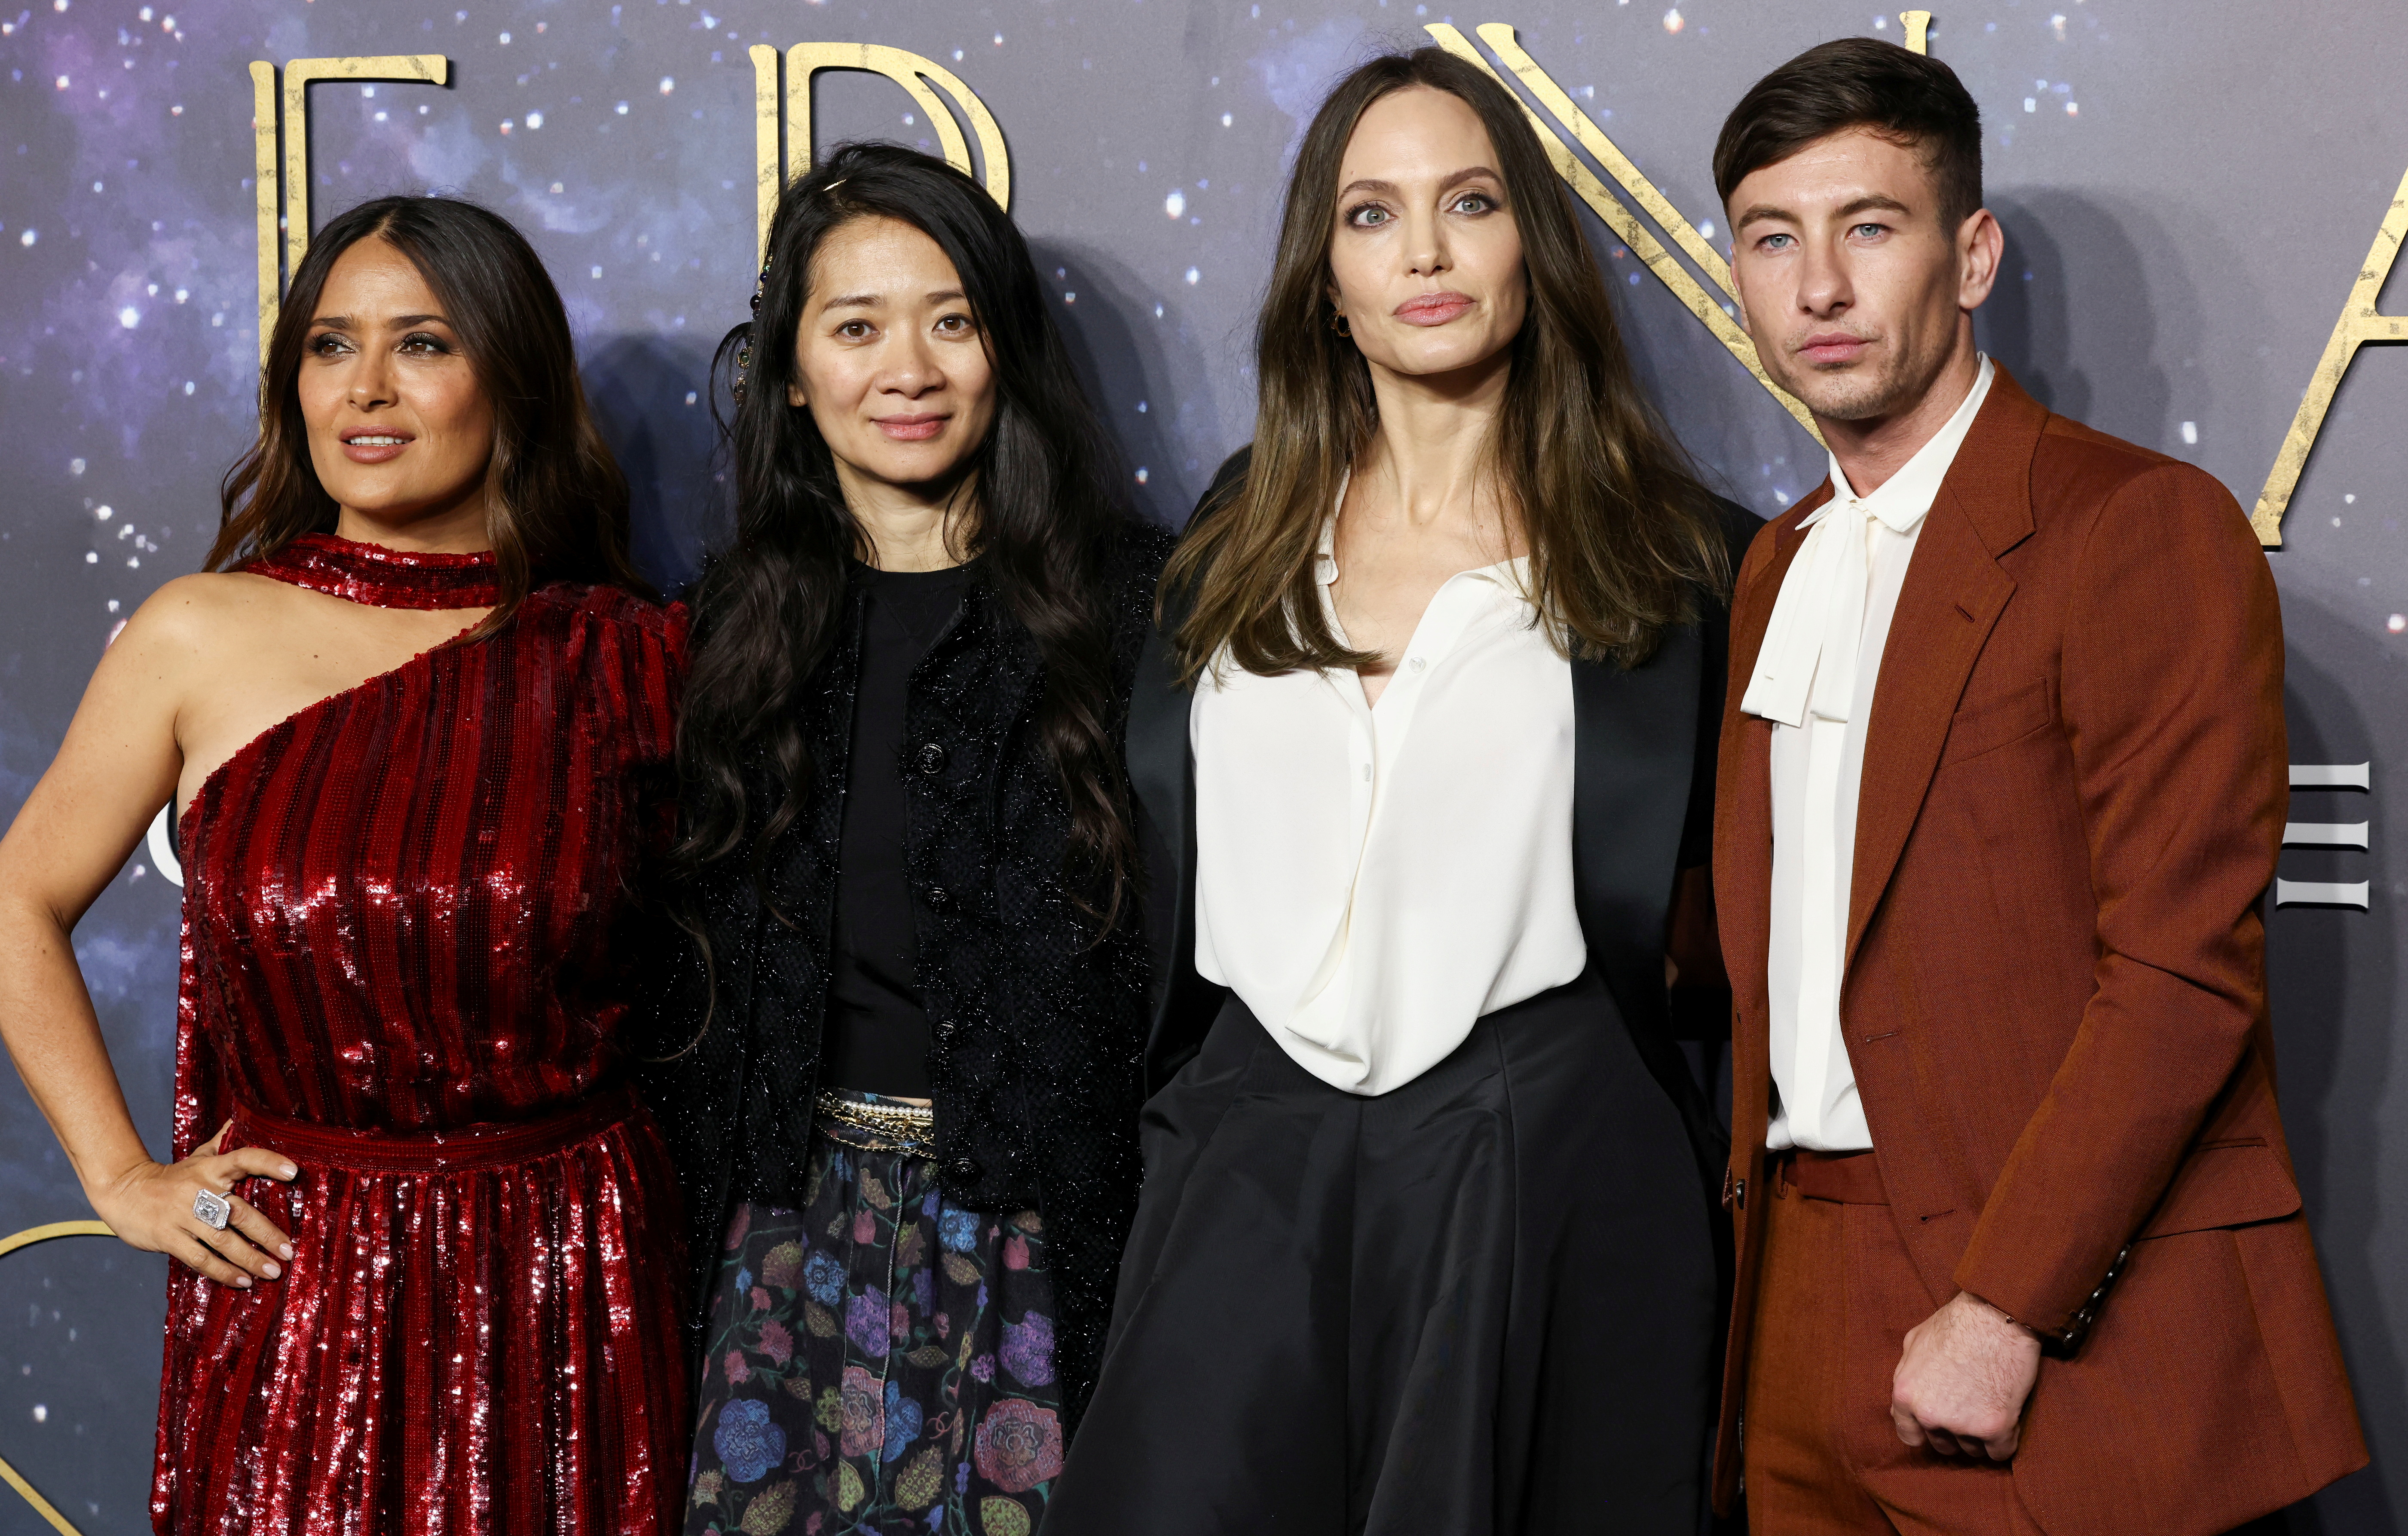 Director Chloe Zhao poses with cast members Salma Hayek, Angelina Jolie and Barry Keoghan as they arrive for a screening of the film 